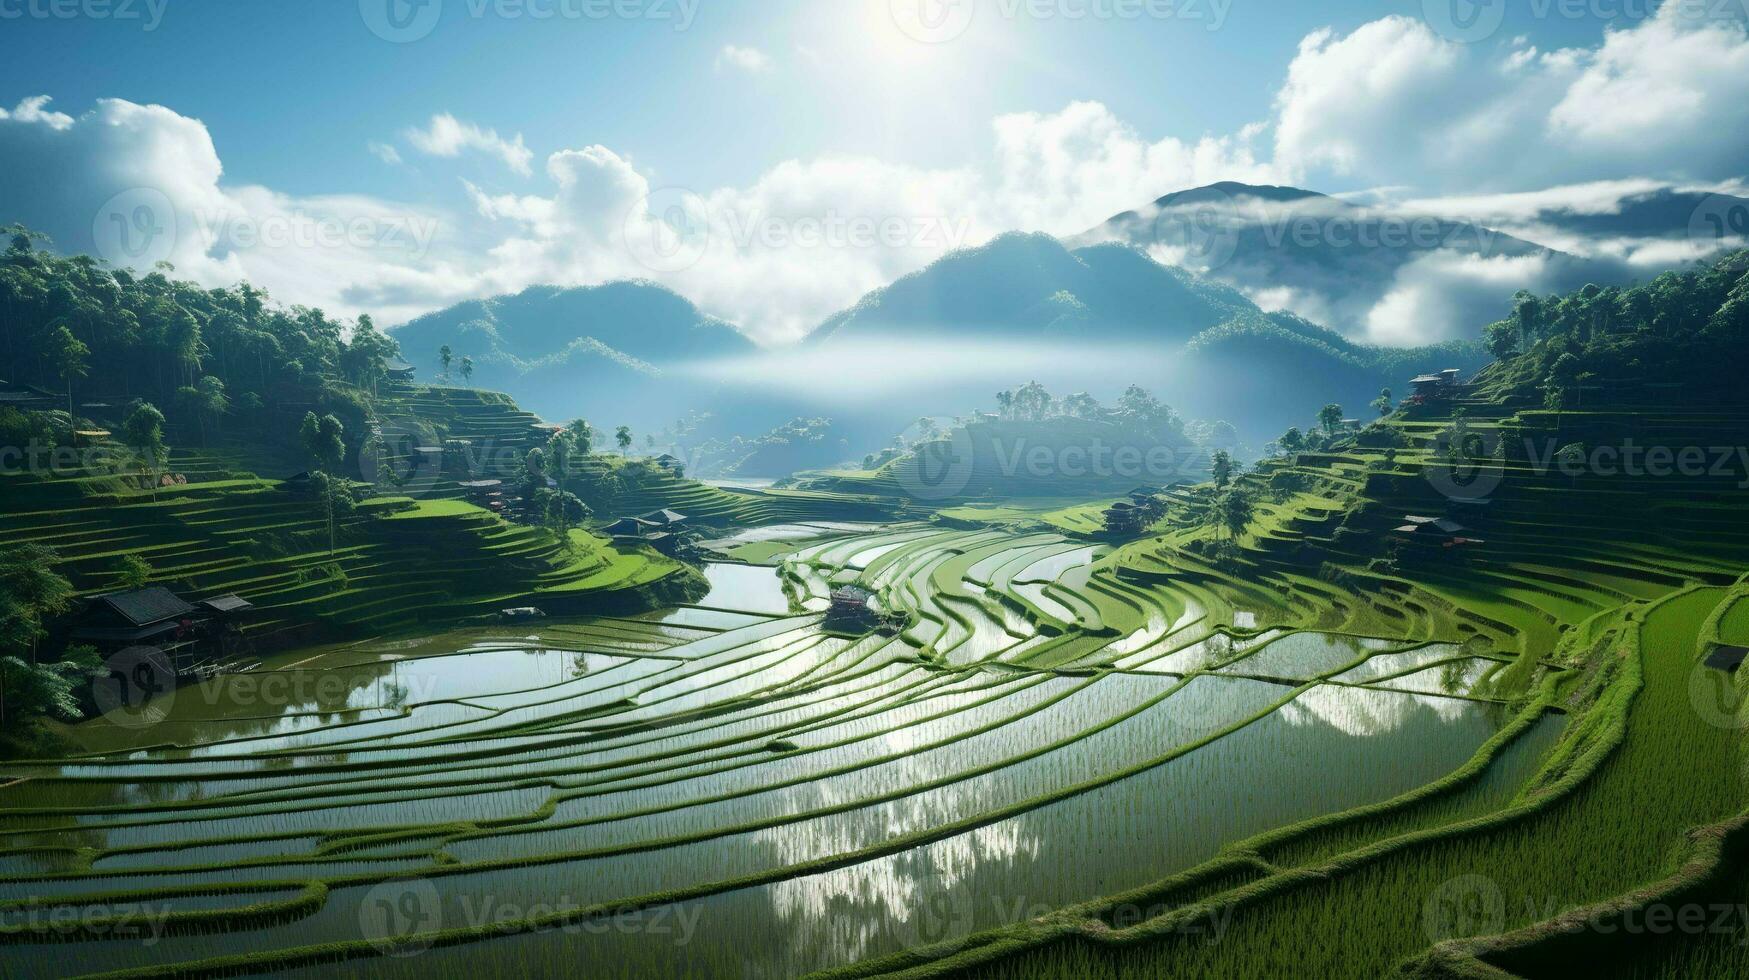 Gorgeous wide angle view of terraced rice fields, a natural wonder photo